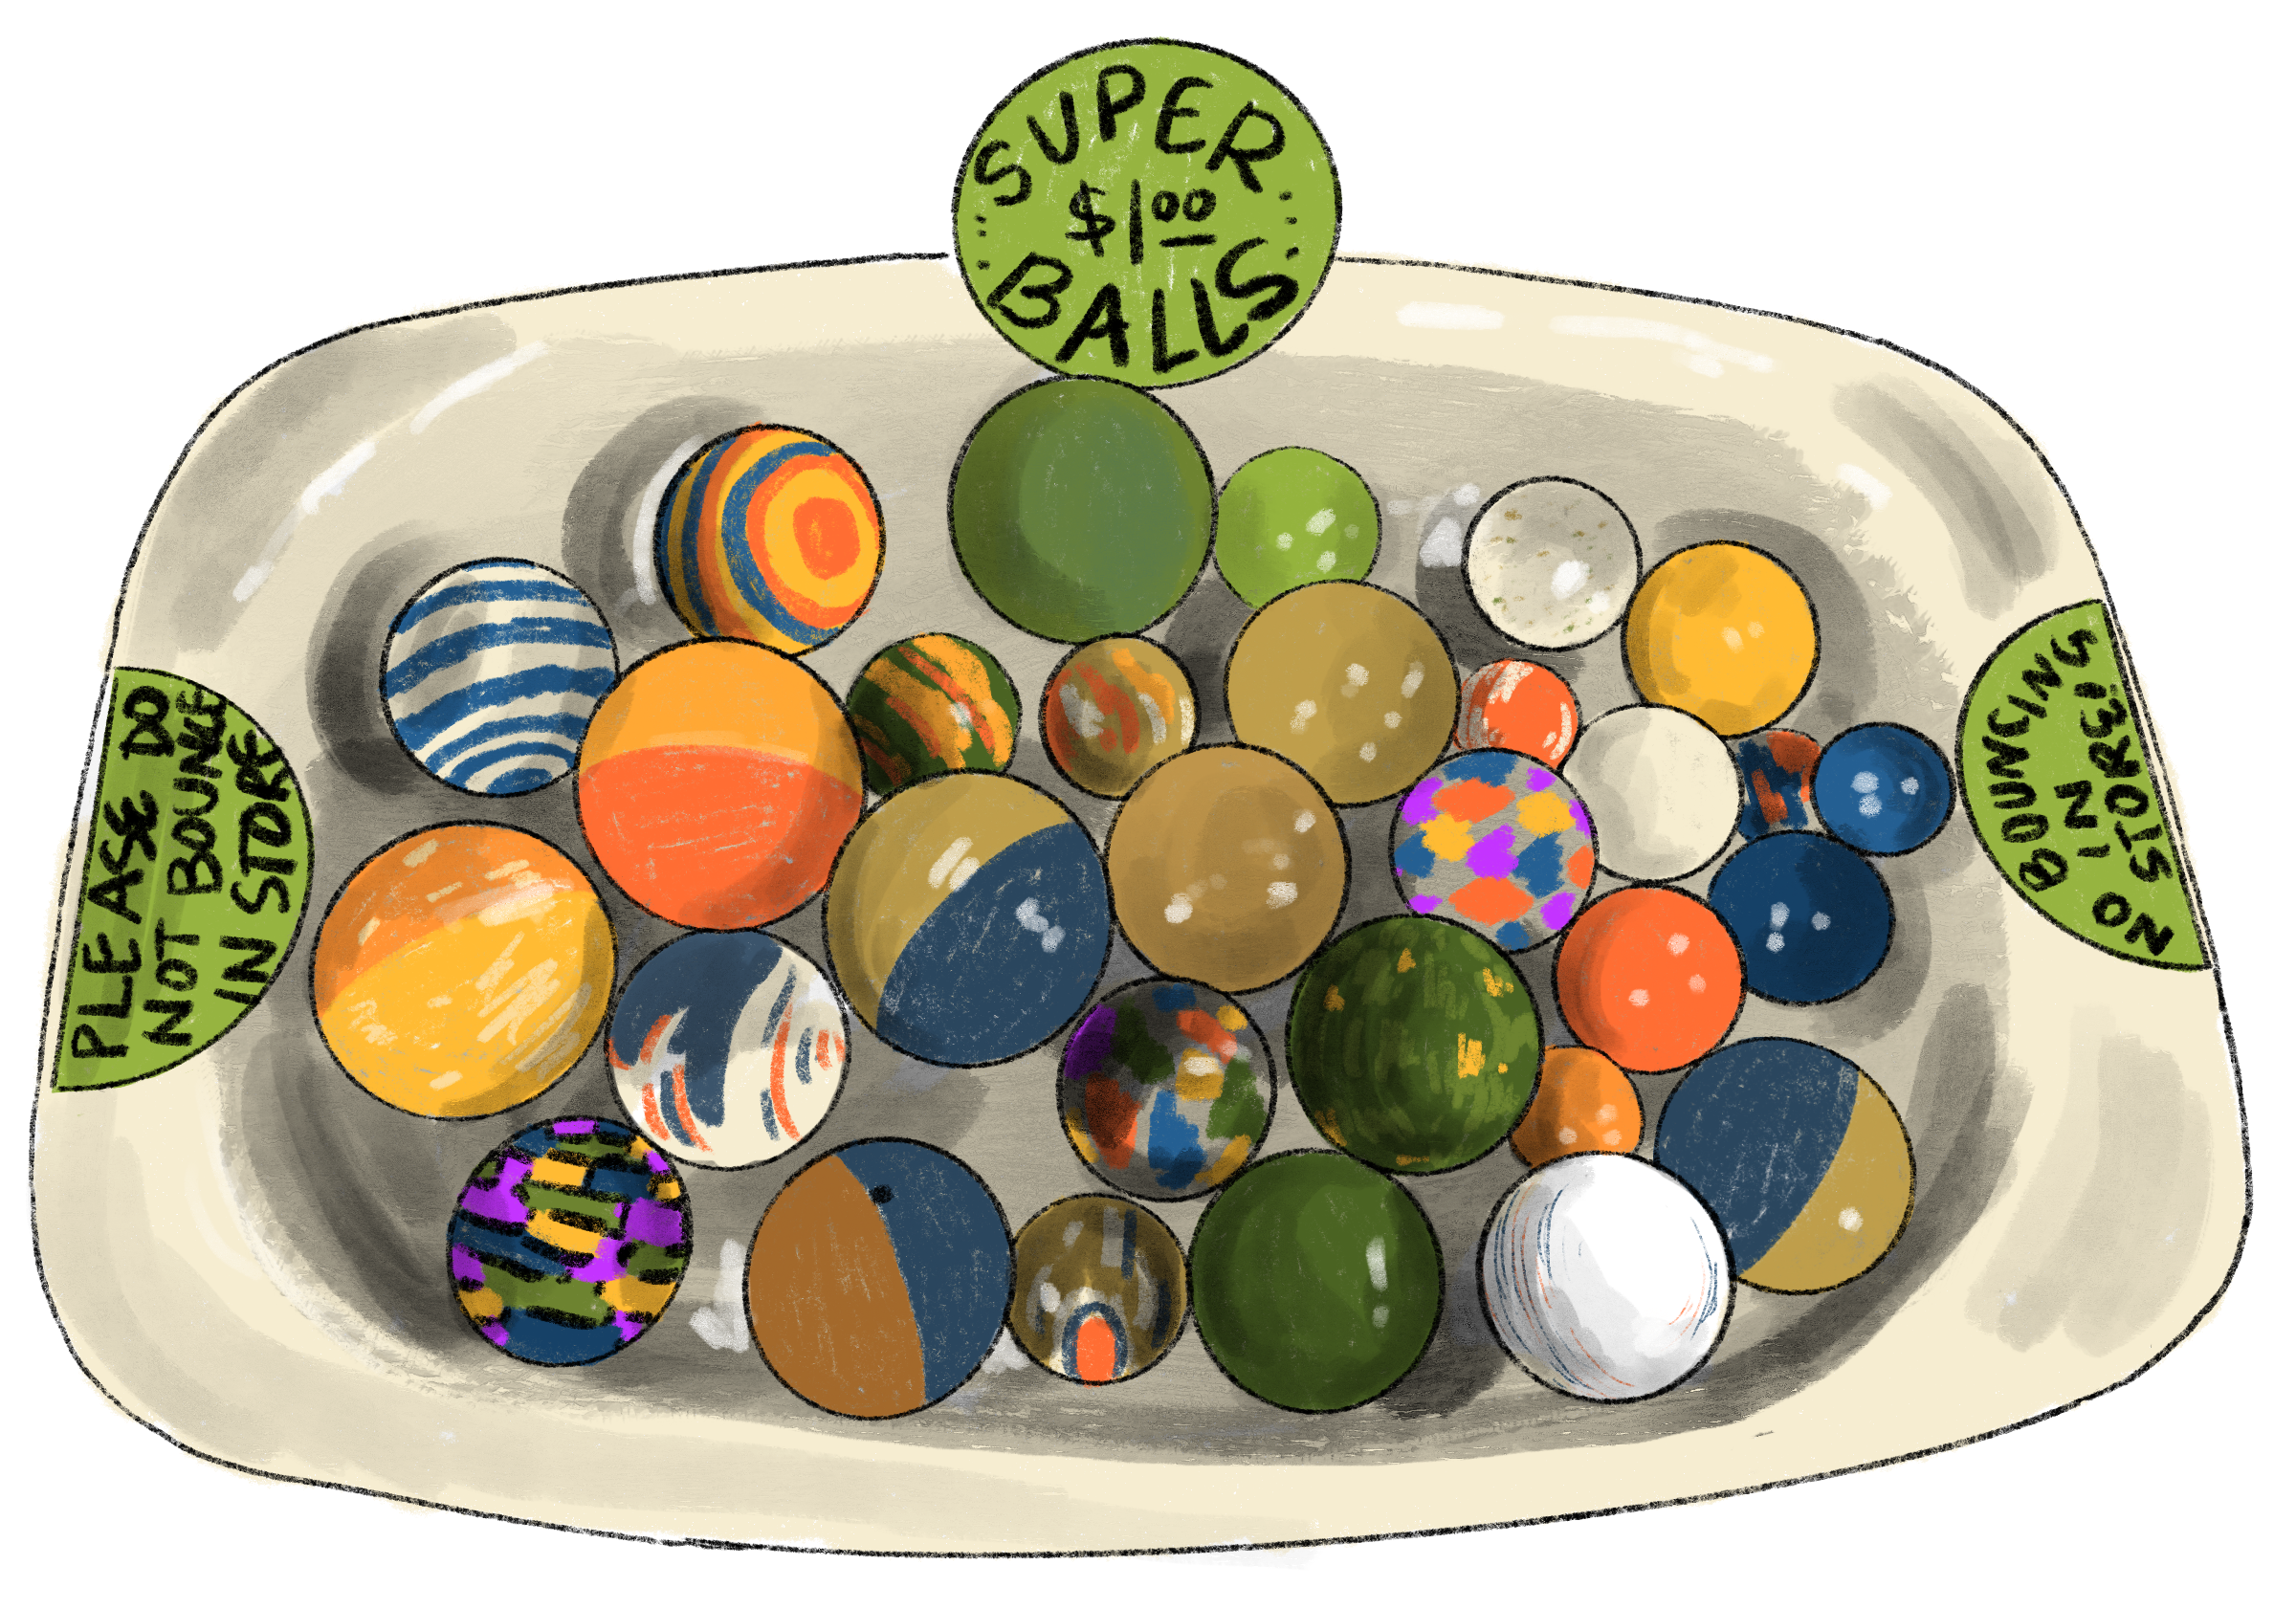 An illustration of a tub of various colored/patterned super balls.